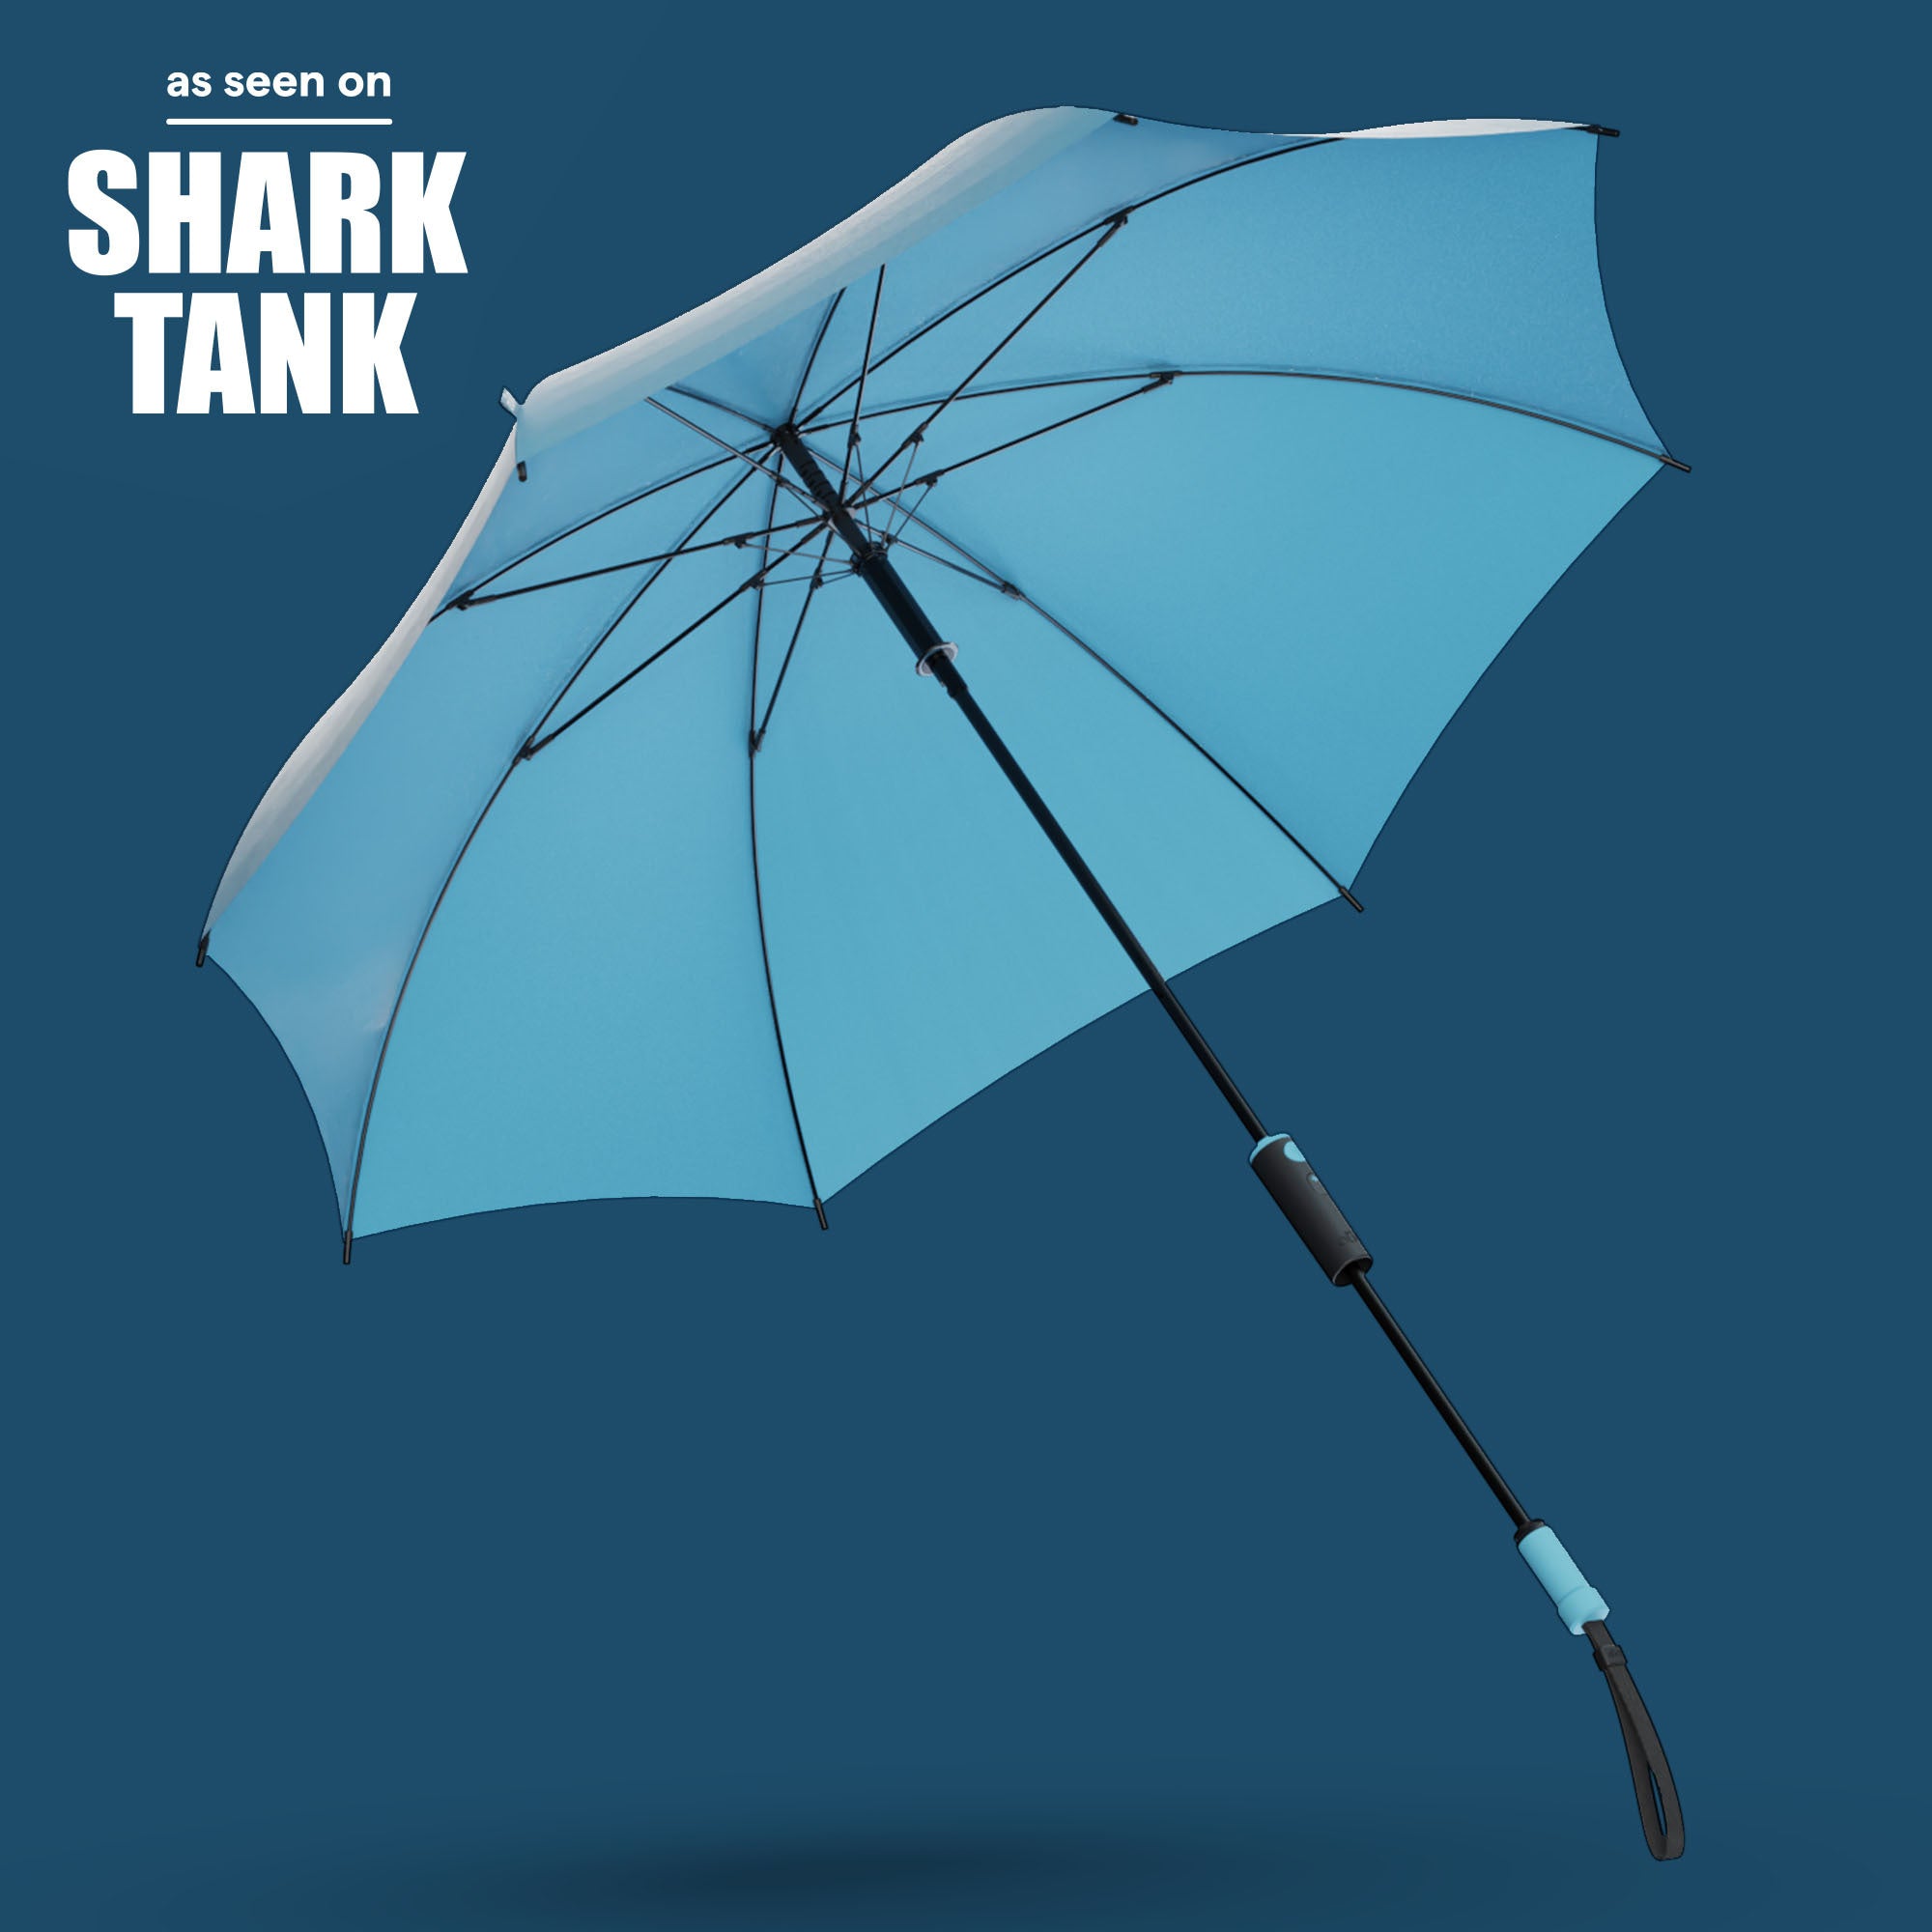 Image of The Duo open with handle extended in Retro Blue, the first-ever dual-handle umbrella as seen on Shark Tank. 